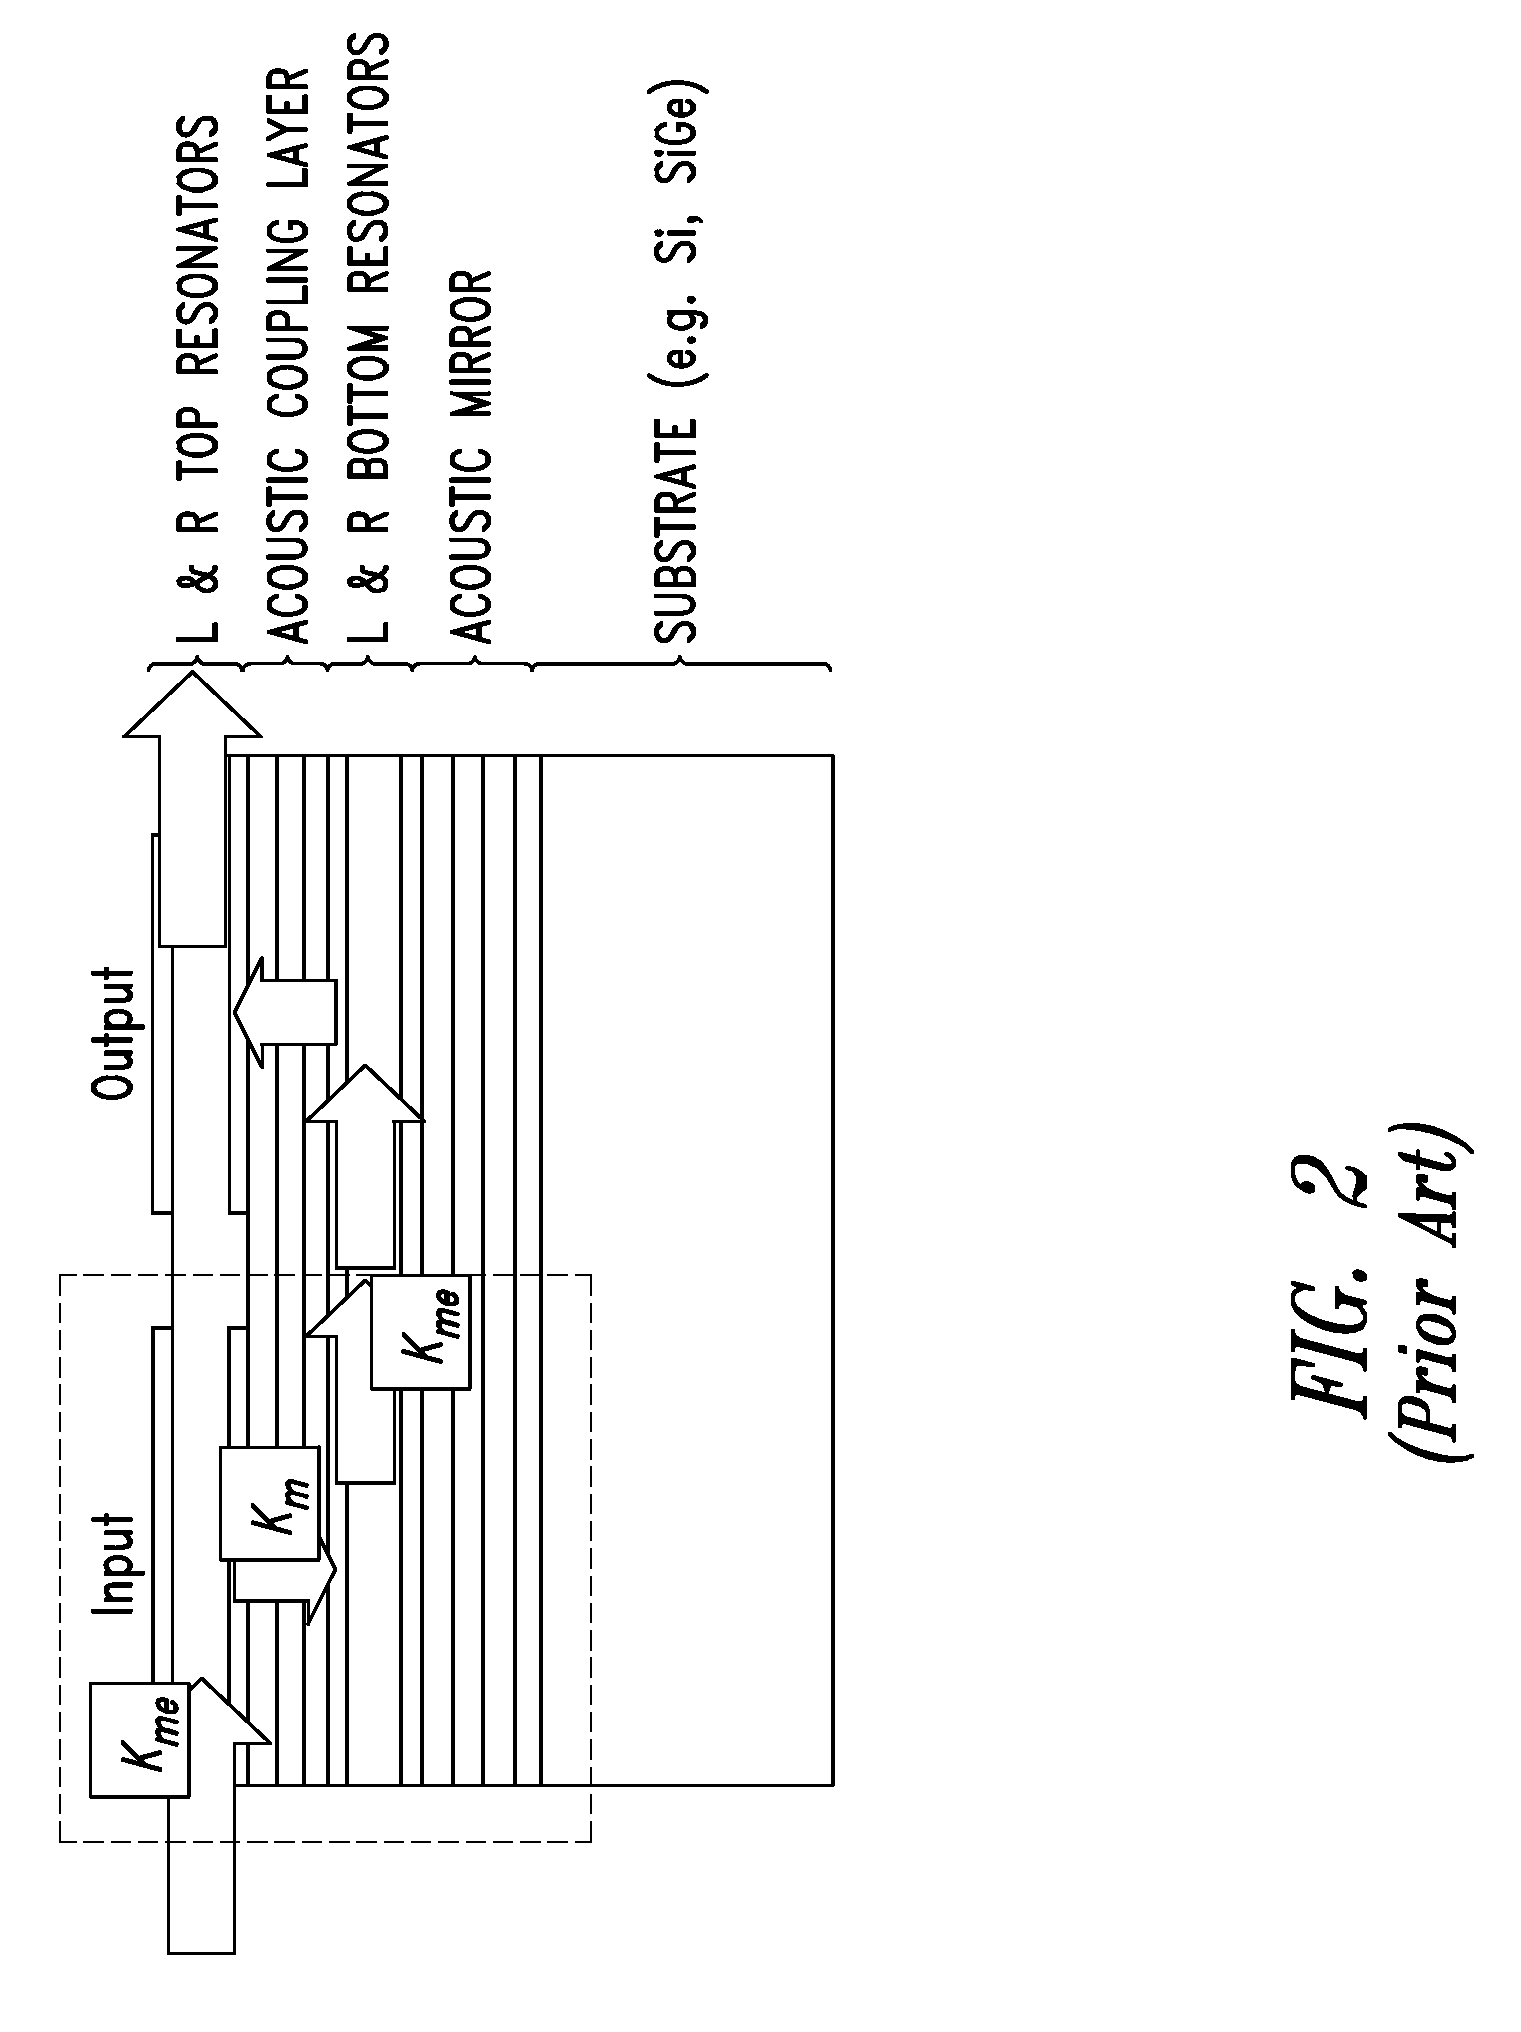 Filtering circuit with coupled acoustic resonators